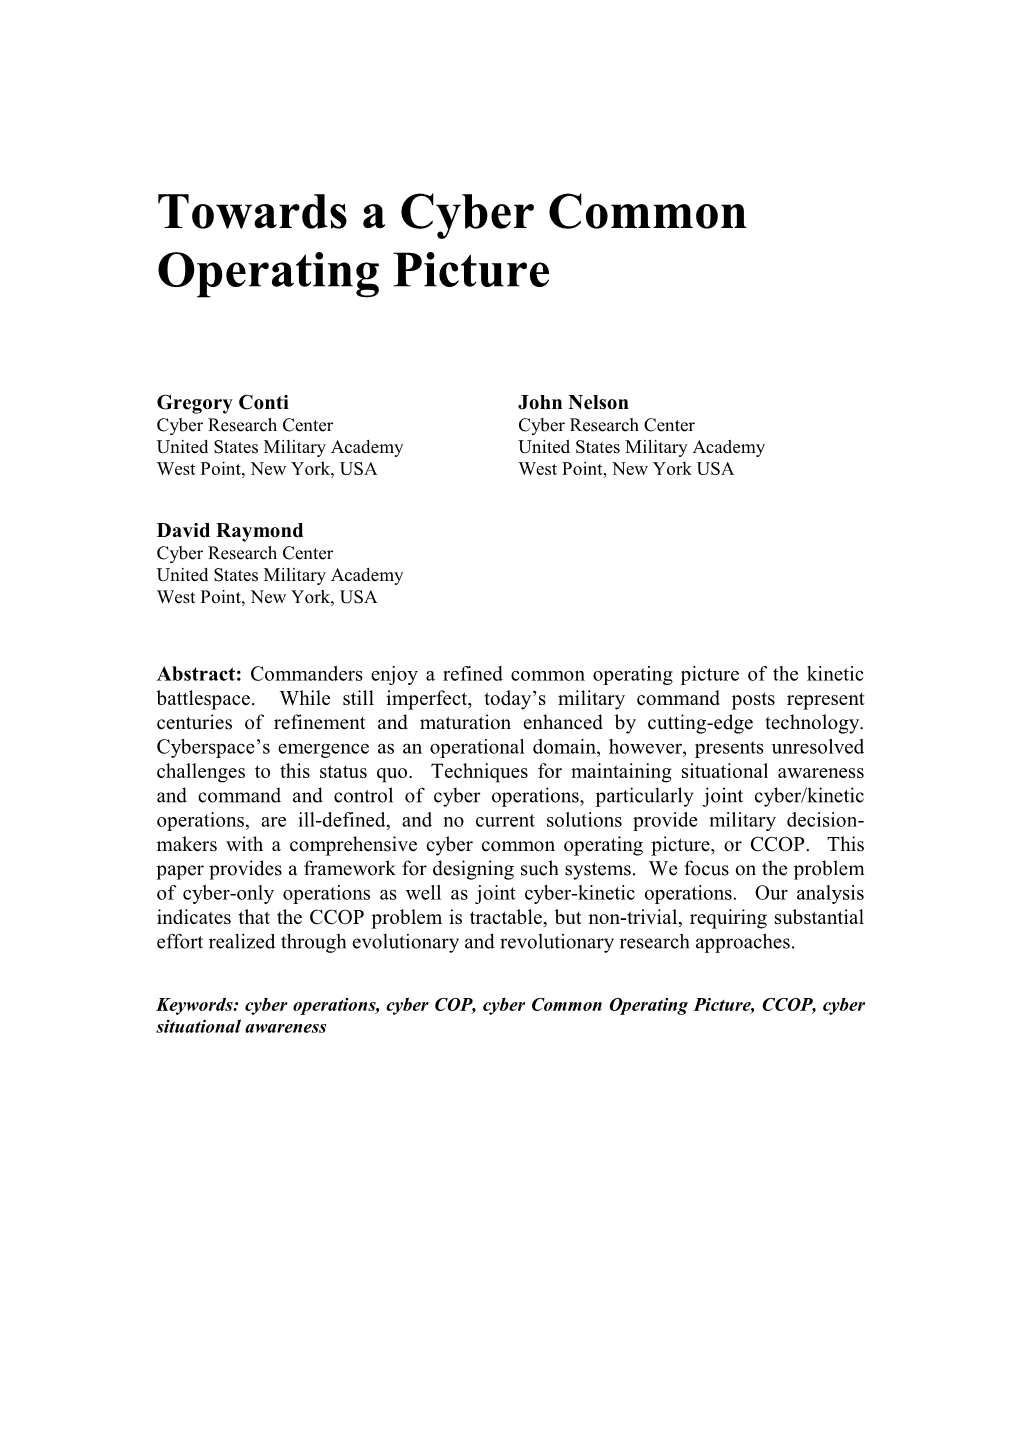 Towards a Cyber Common Operating Picture